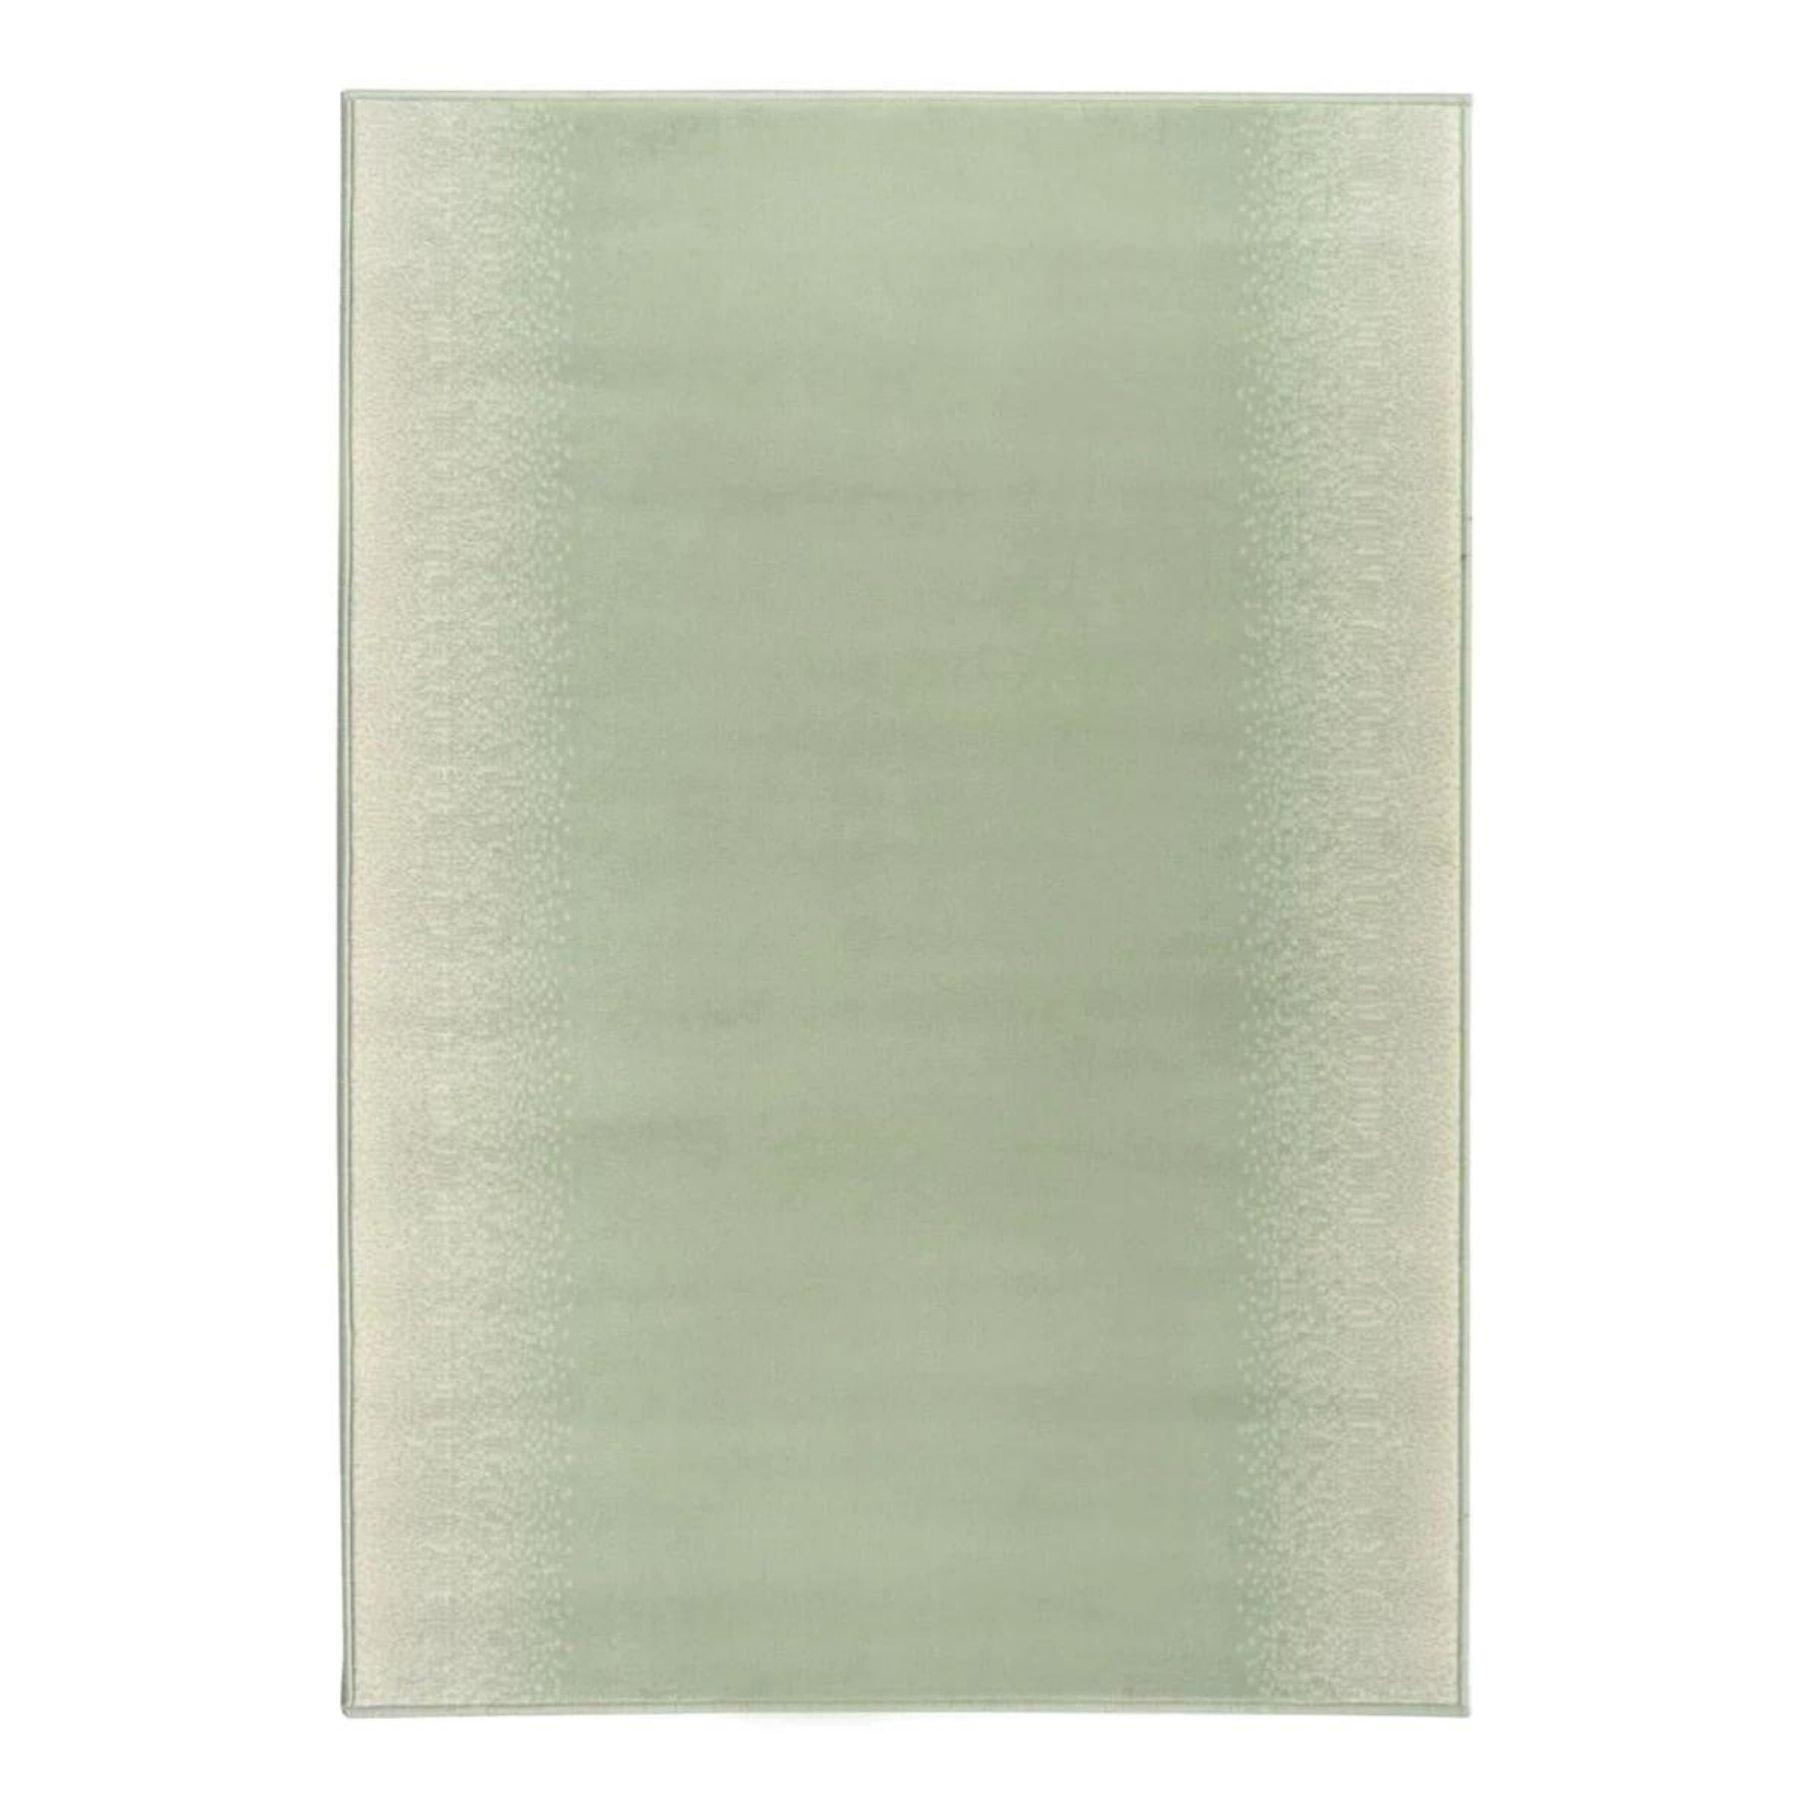 Maestro Collection Ombre Design Rug in Green - 3797 GG11